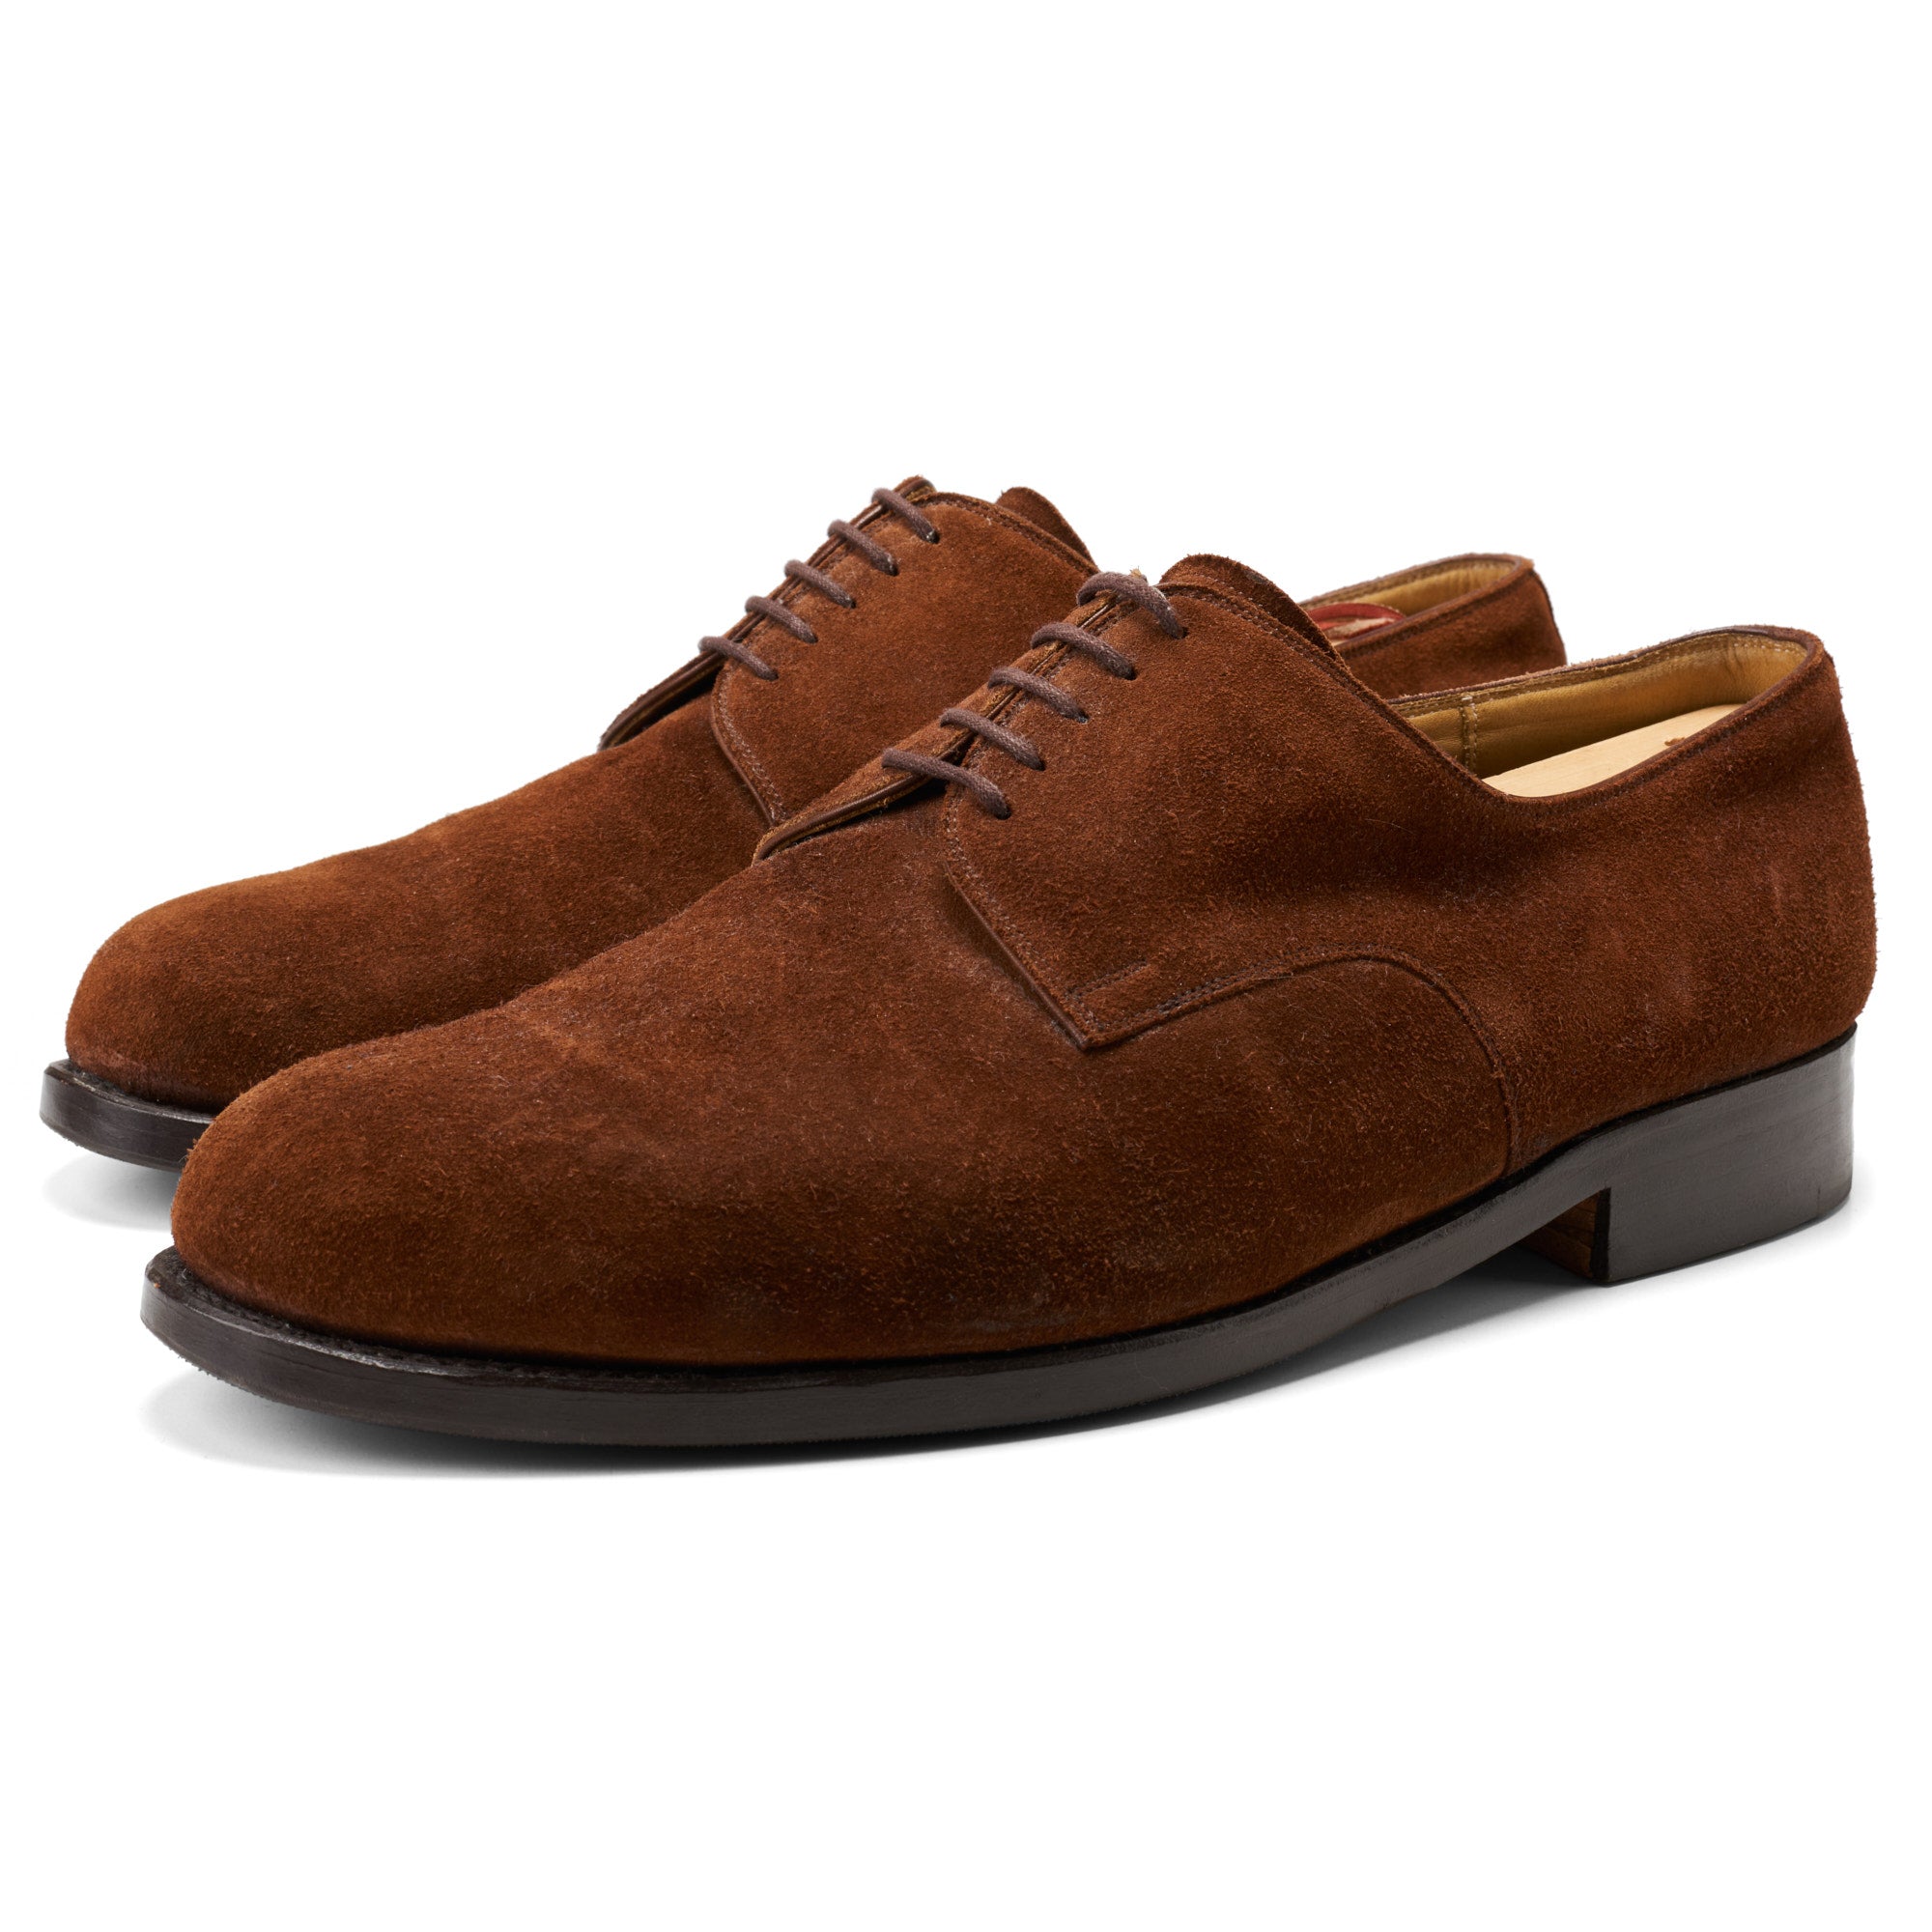 VASS Budapest Brown Suede Leather "London 5 Eyelet" Derby Shoes Last BP US 14 VASS BUDAPEST